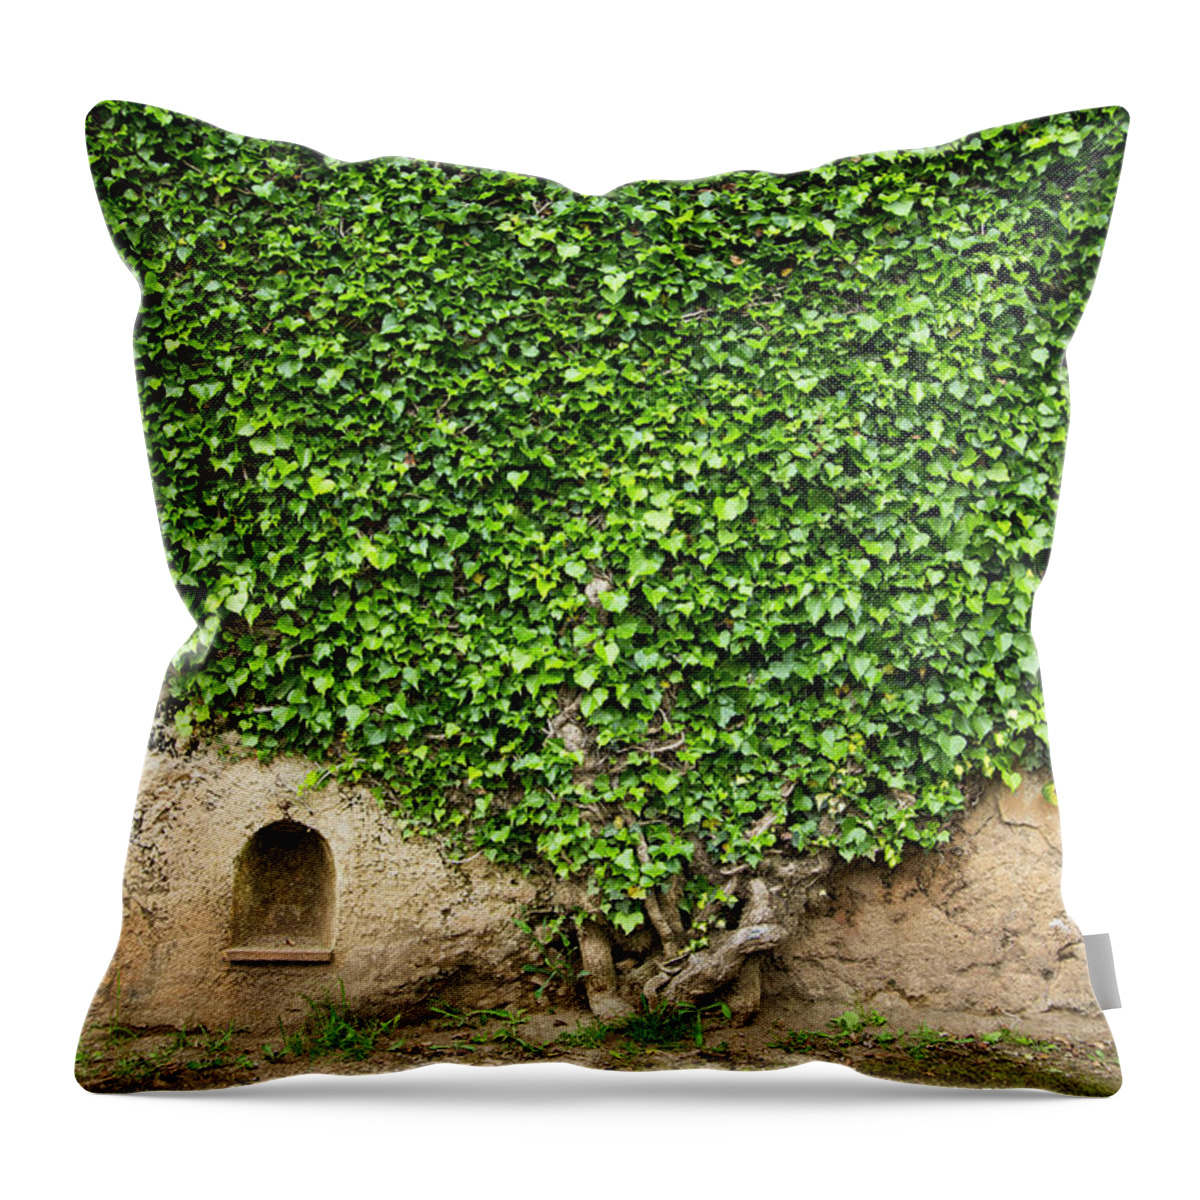 Arch Throw Pillow featuring the photograph Ivy On A Wall Of Villa Cimbrone, Ravello by Buena Vista Images